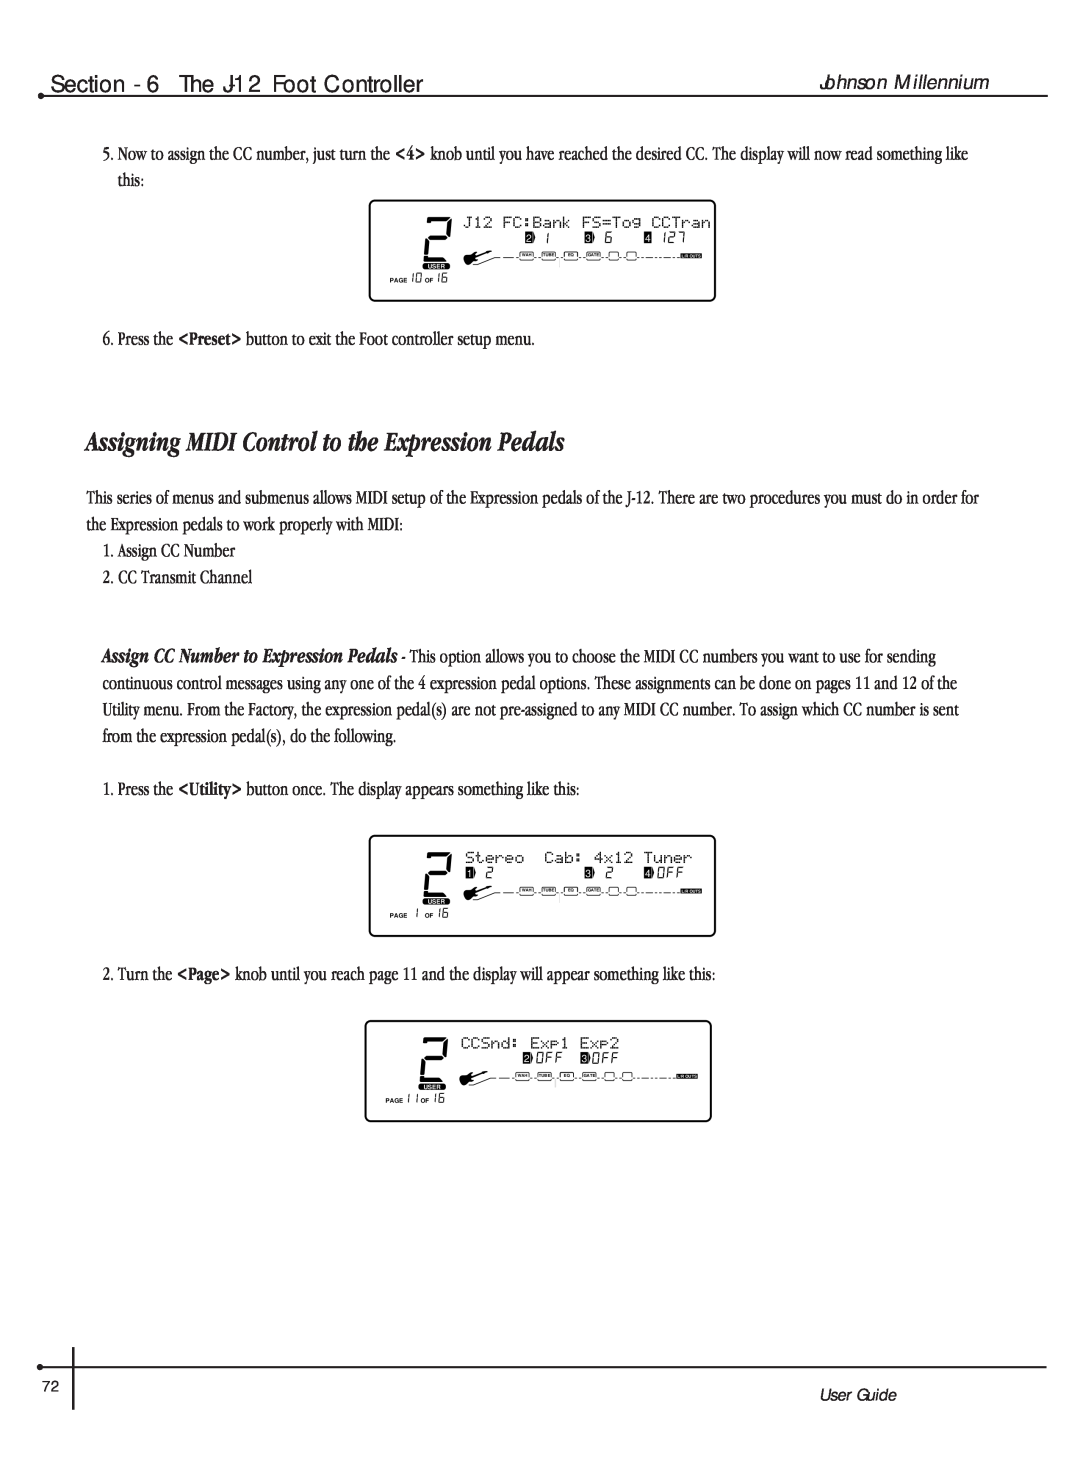 Millennium Enterprises Integrated Modeling Amplifier manual Assigning MIDI Control to the Expression Pedals, User Guide 